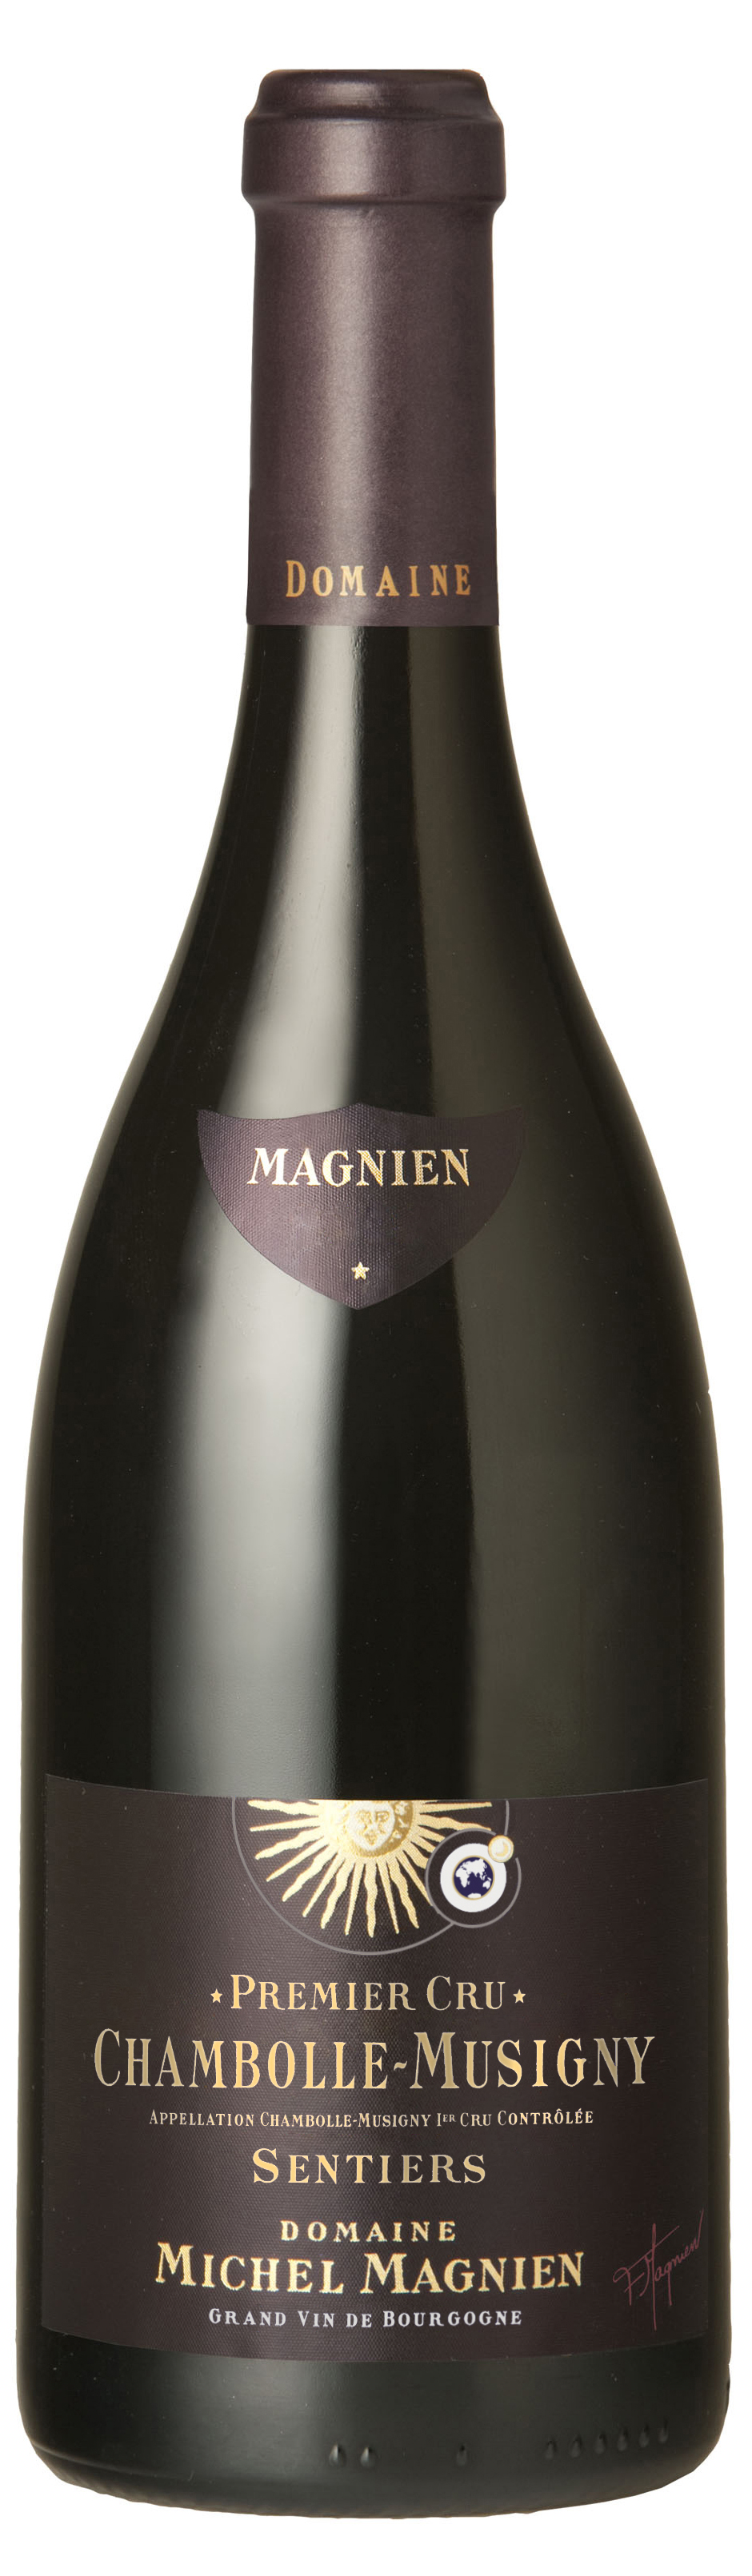 Domaine Michel Magnien Chambolle-Musigny Sentiers 2016 750ml